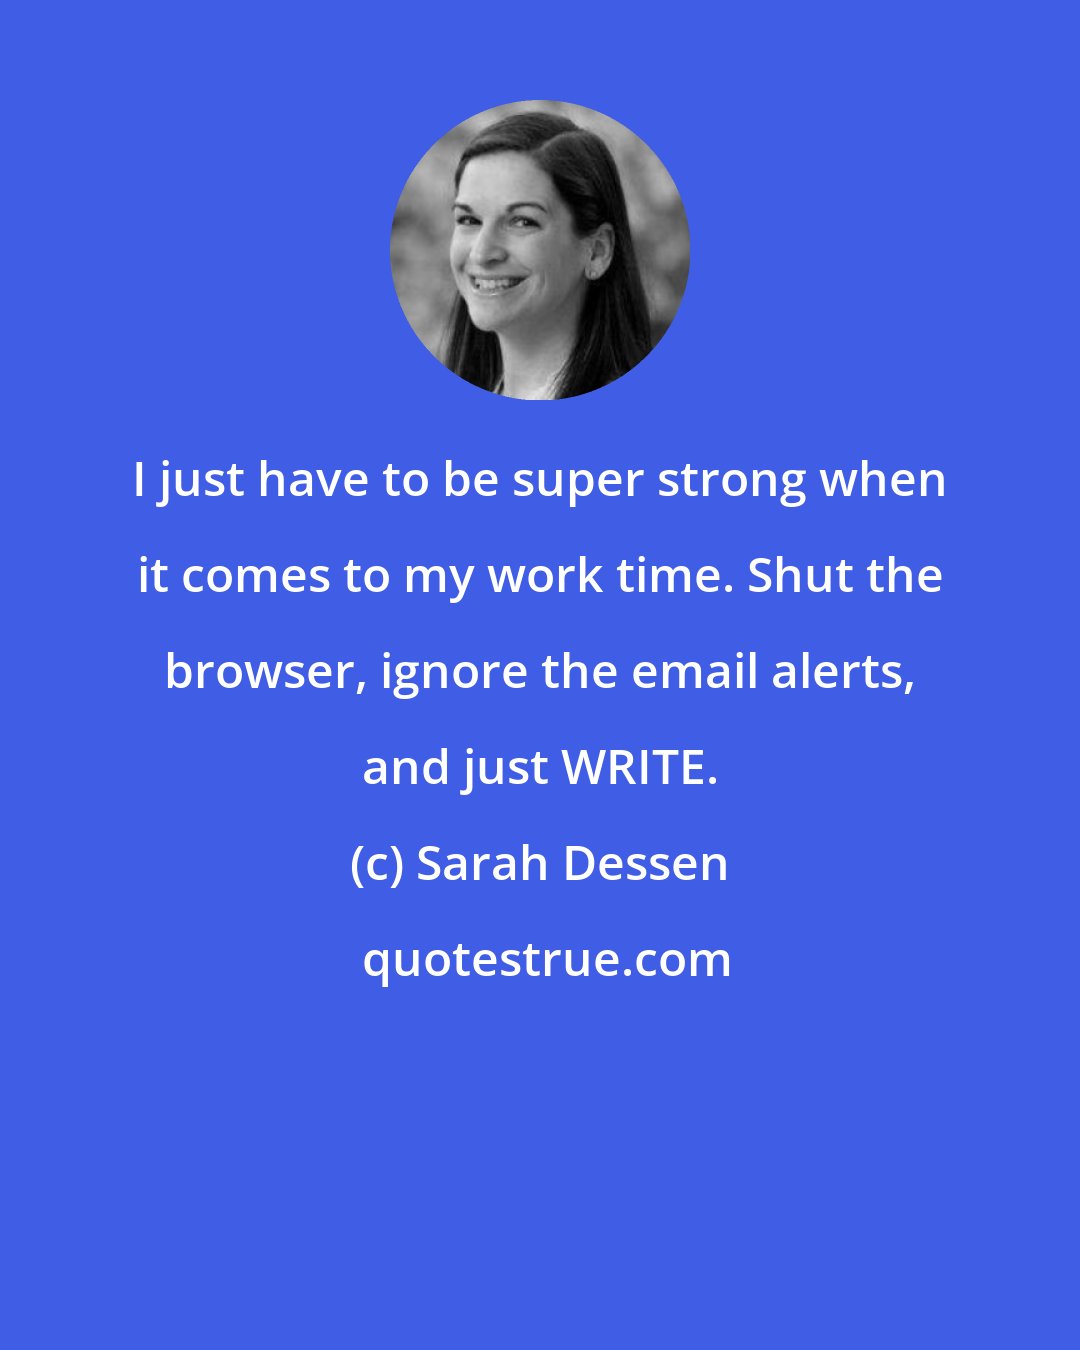 Sarah Dessen: I just have to be super strong when it comes to my work time. Shut the browser, ignore the email alerts, and just WRITE.